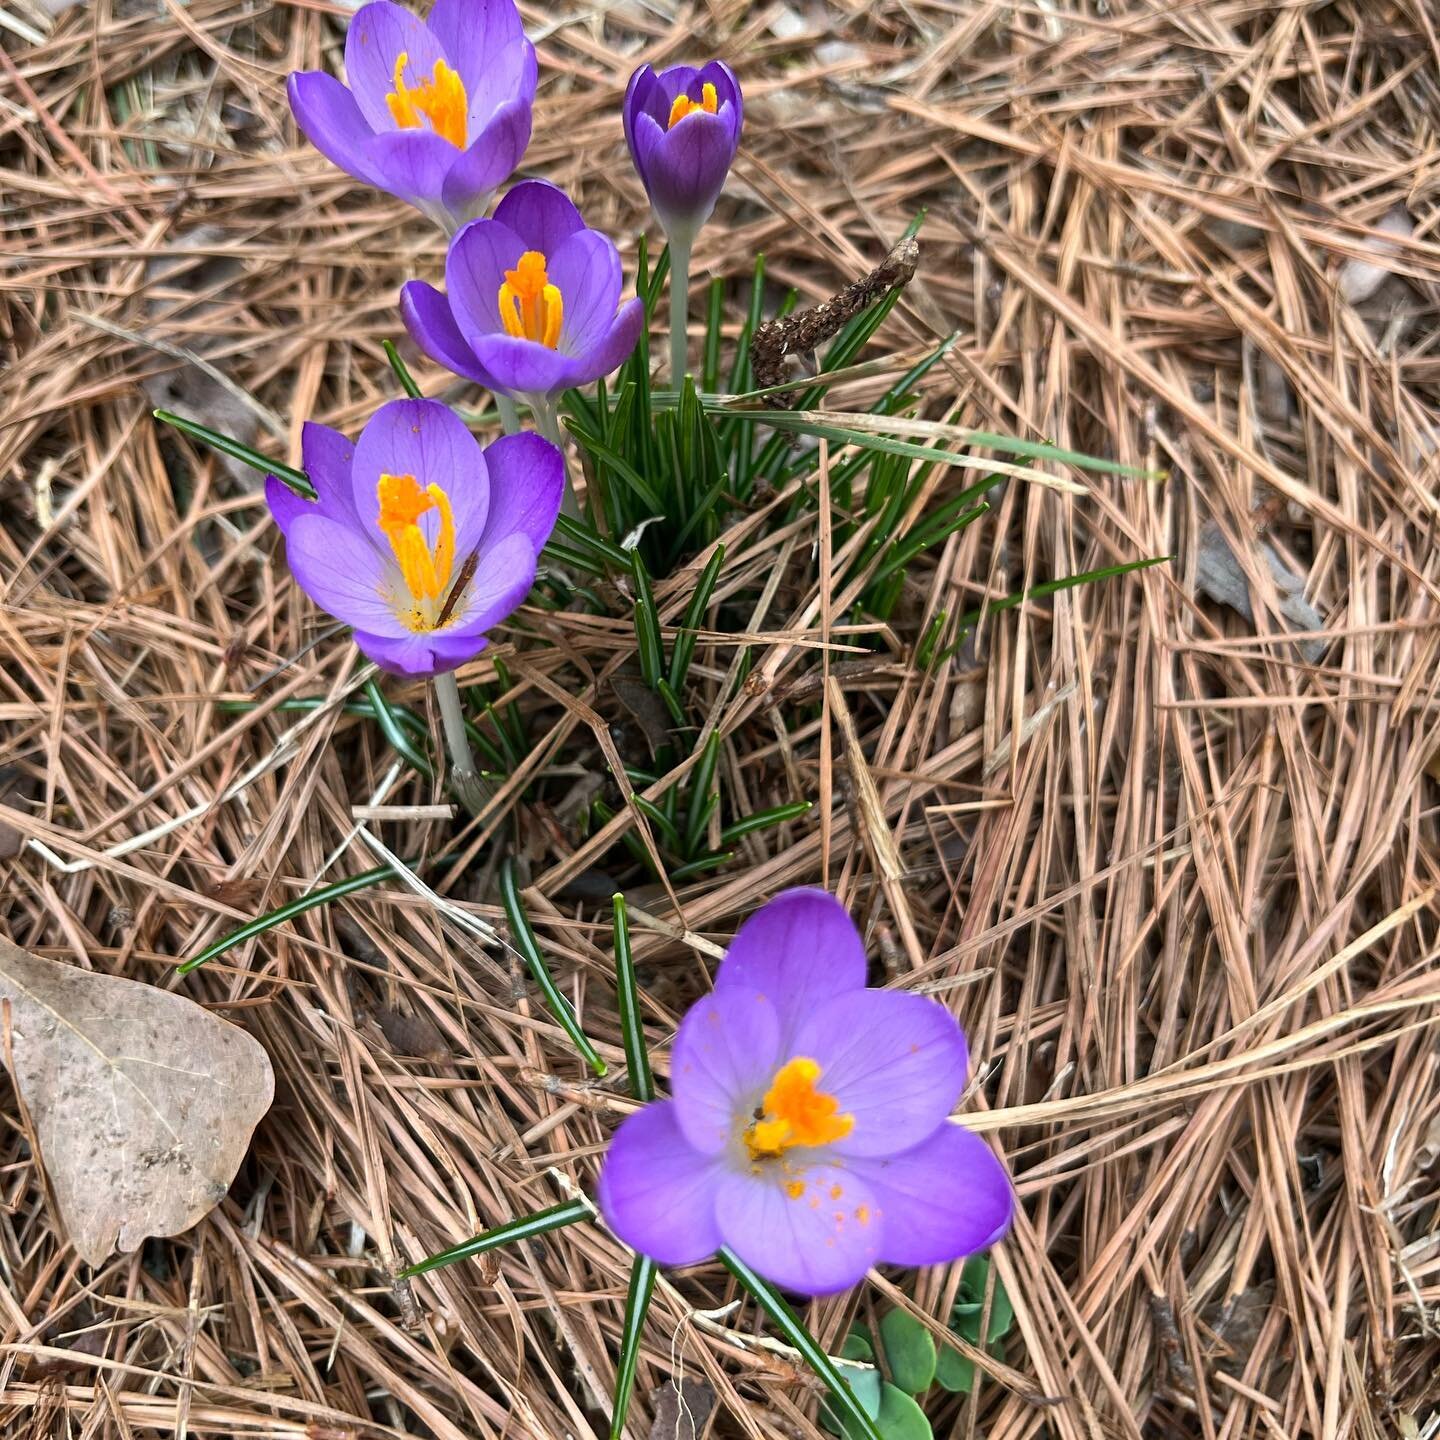 Evidence that spring will come again, the crocuses, daffodils and forsythia are all in bloom. What do you see blooming in your neighborhood?  #springflowers #getoutside #neighborhoodwalks #mindfulnature